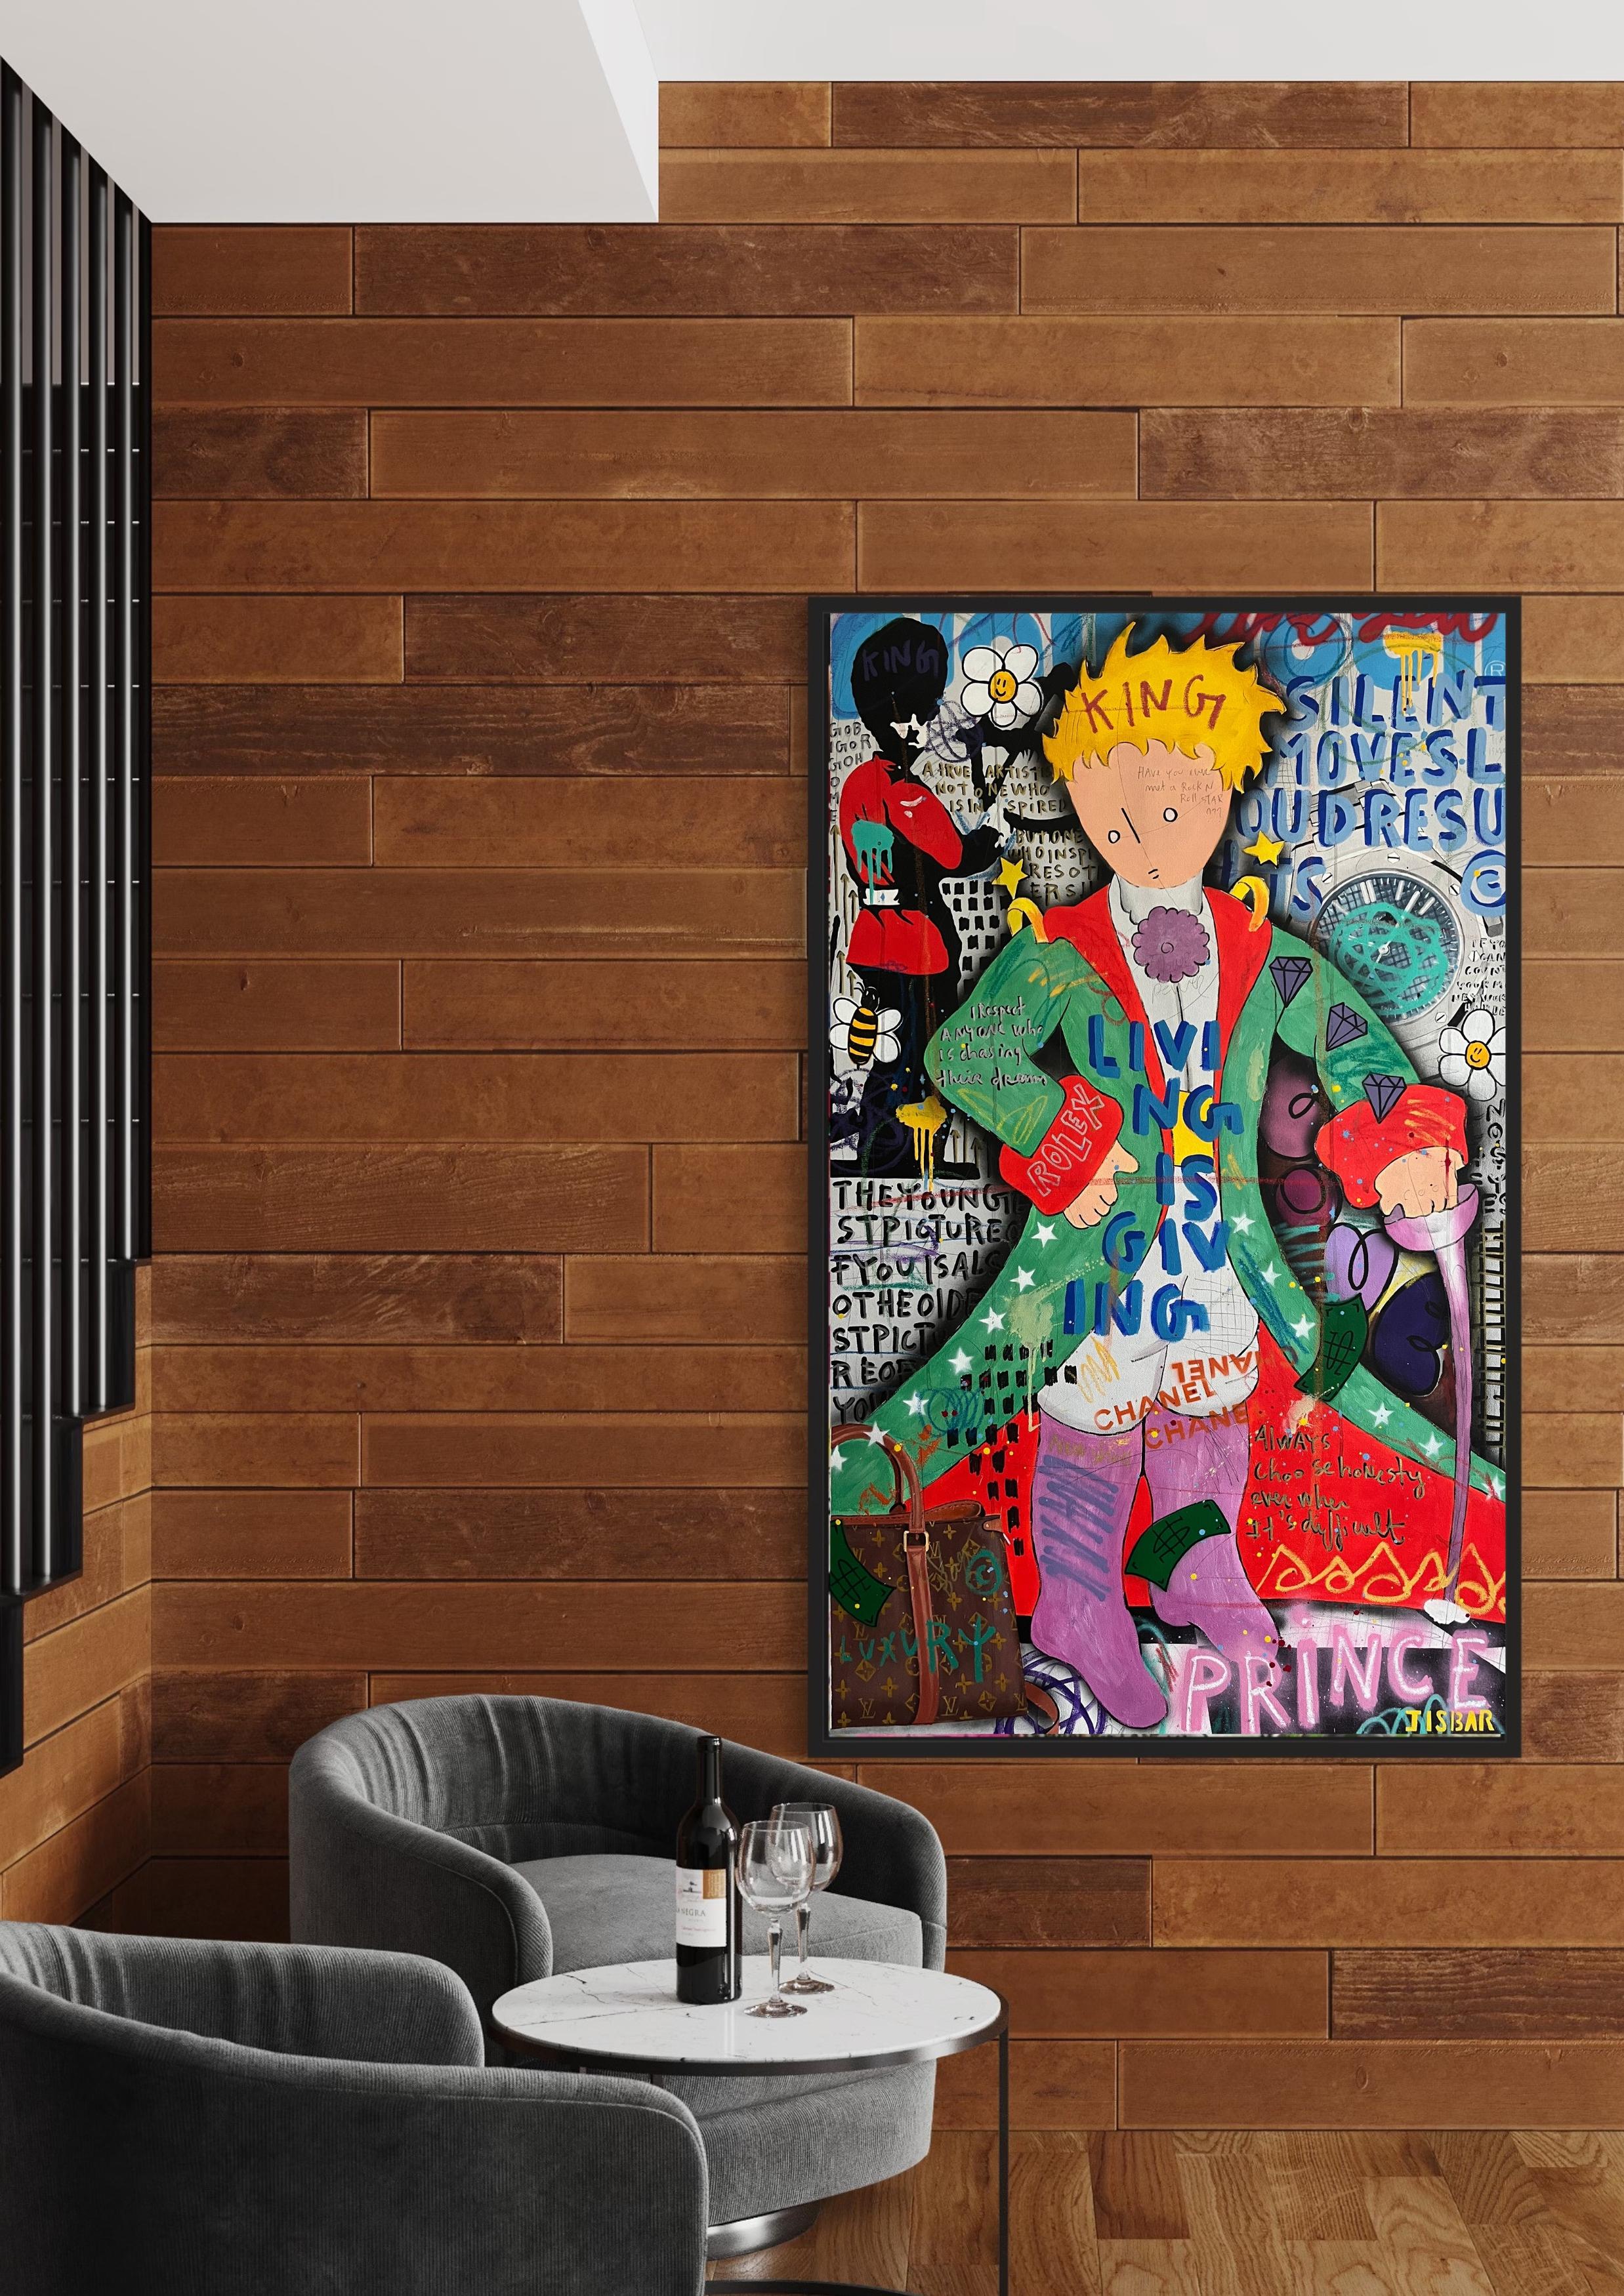 Luxe Prince - Painting by Jisbar